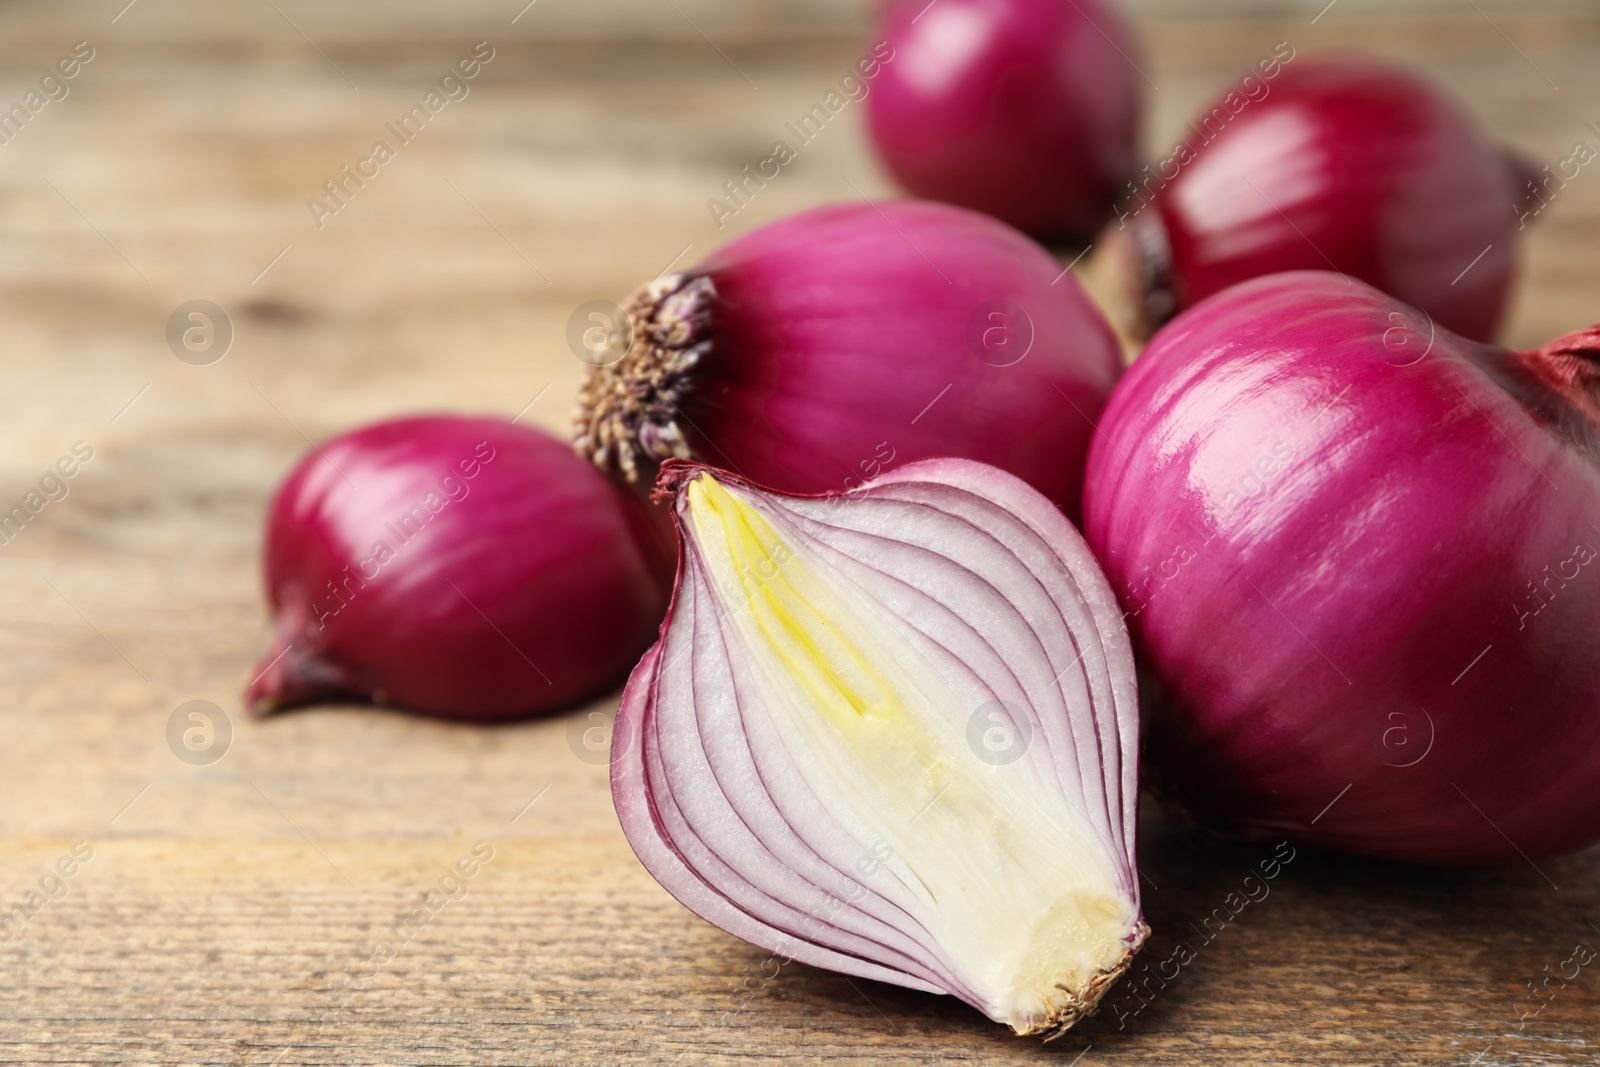 Photo of Ripe red onion bulbs on wooden table, closeup